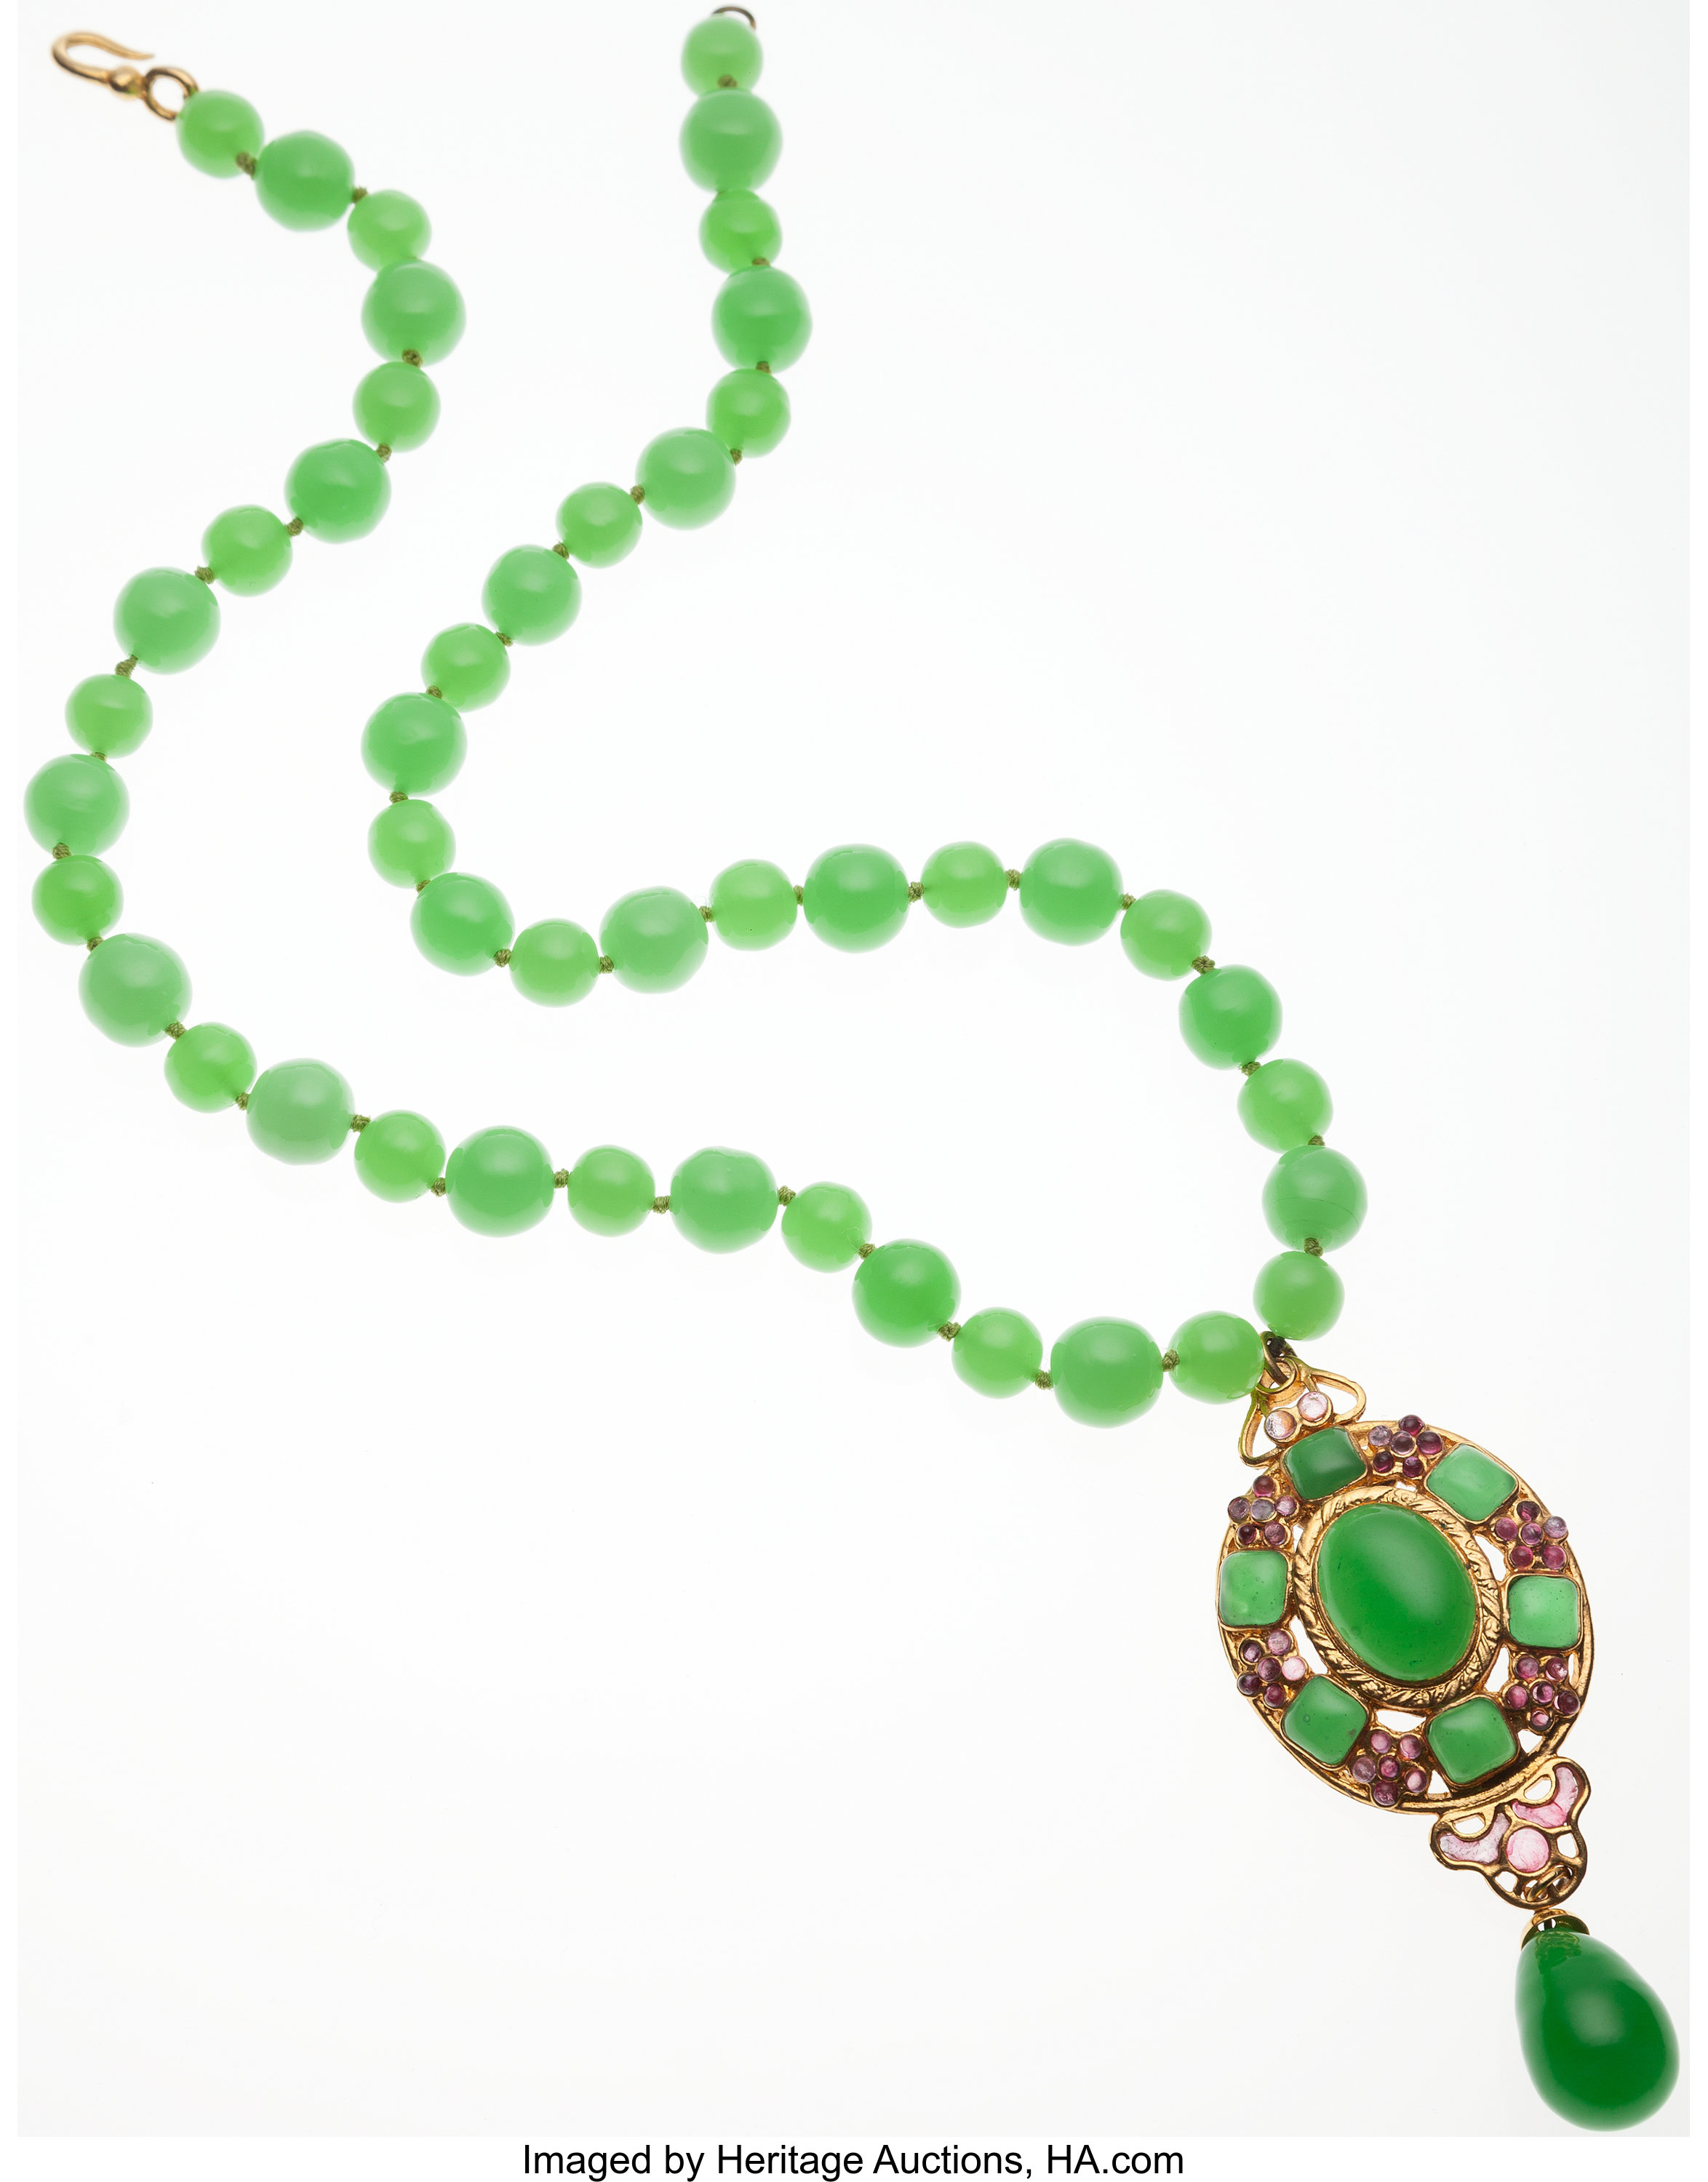 CHANEL VERY VINTAGE 1970'S EMERALD GREEN GRIPOIX NECKLACE